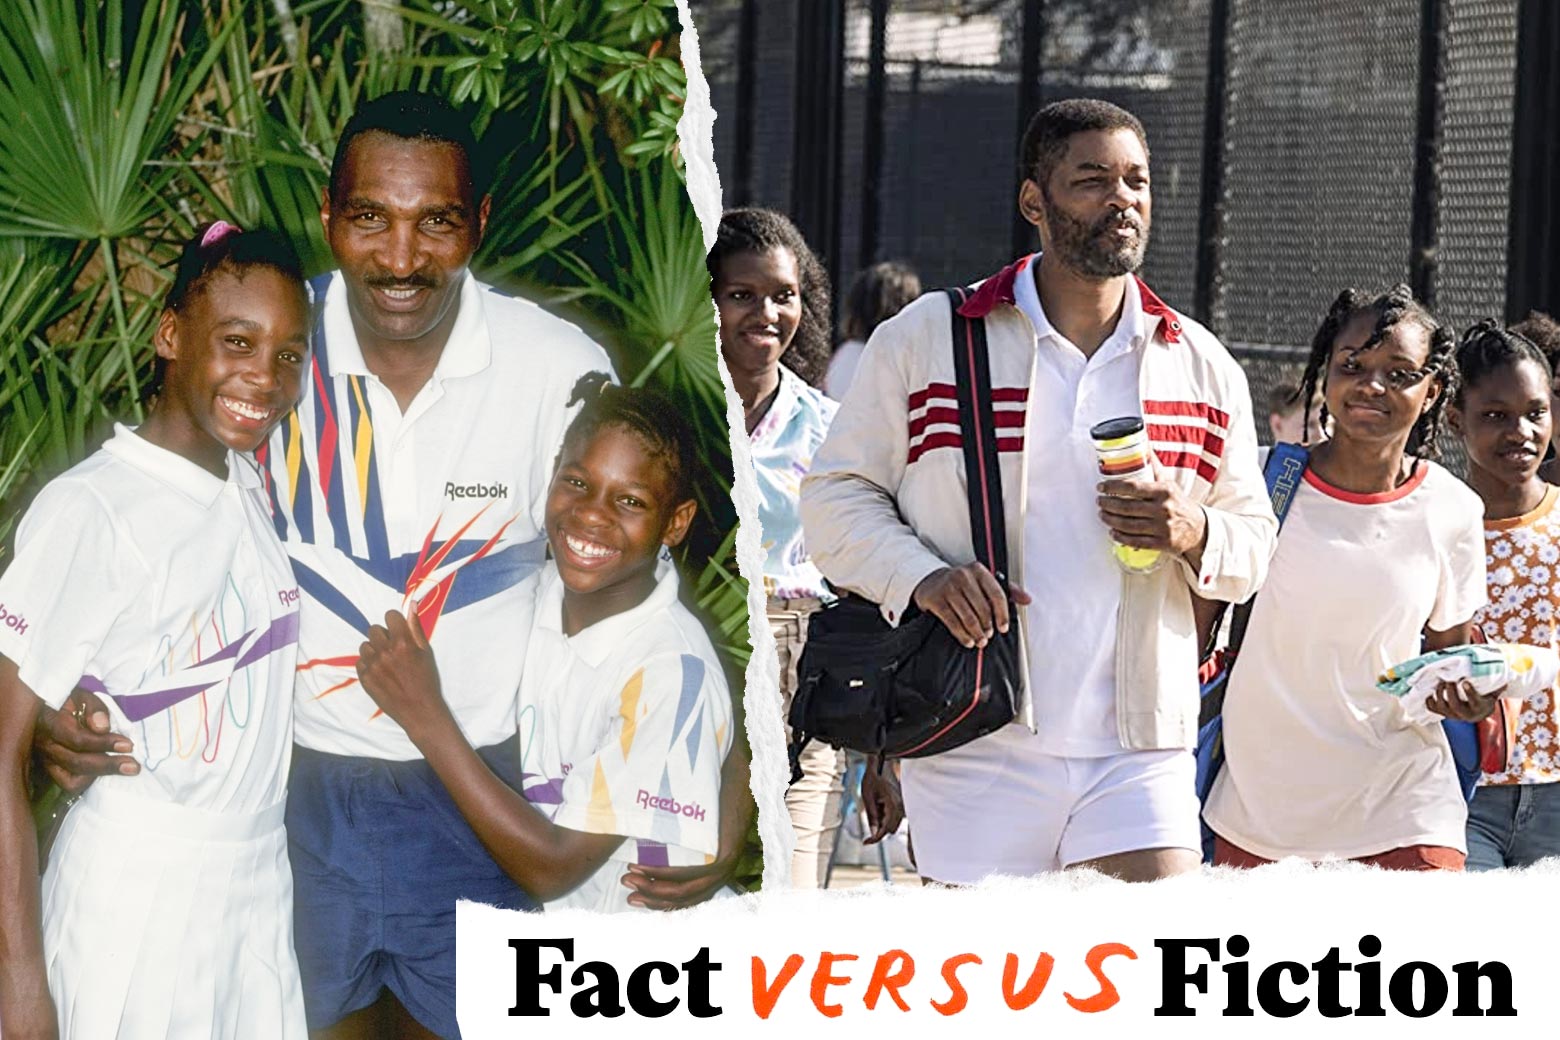 A side-by-side showing Richard Williams along with the young Venus and Serena Williams in both the movie and in real life. They look remarkably similar, all clad in tennis gear and with the girls in braids.